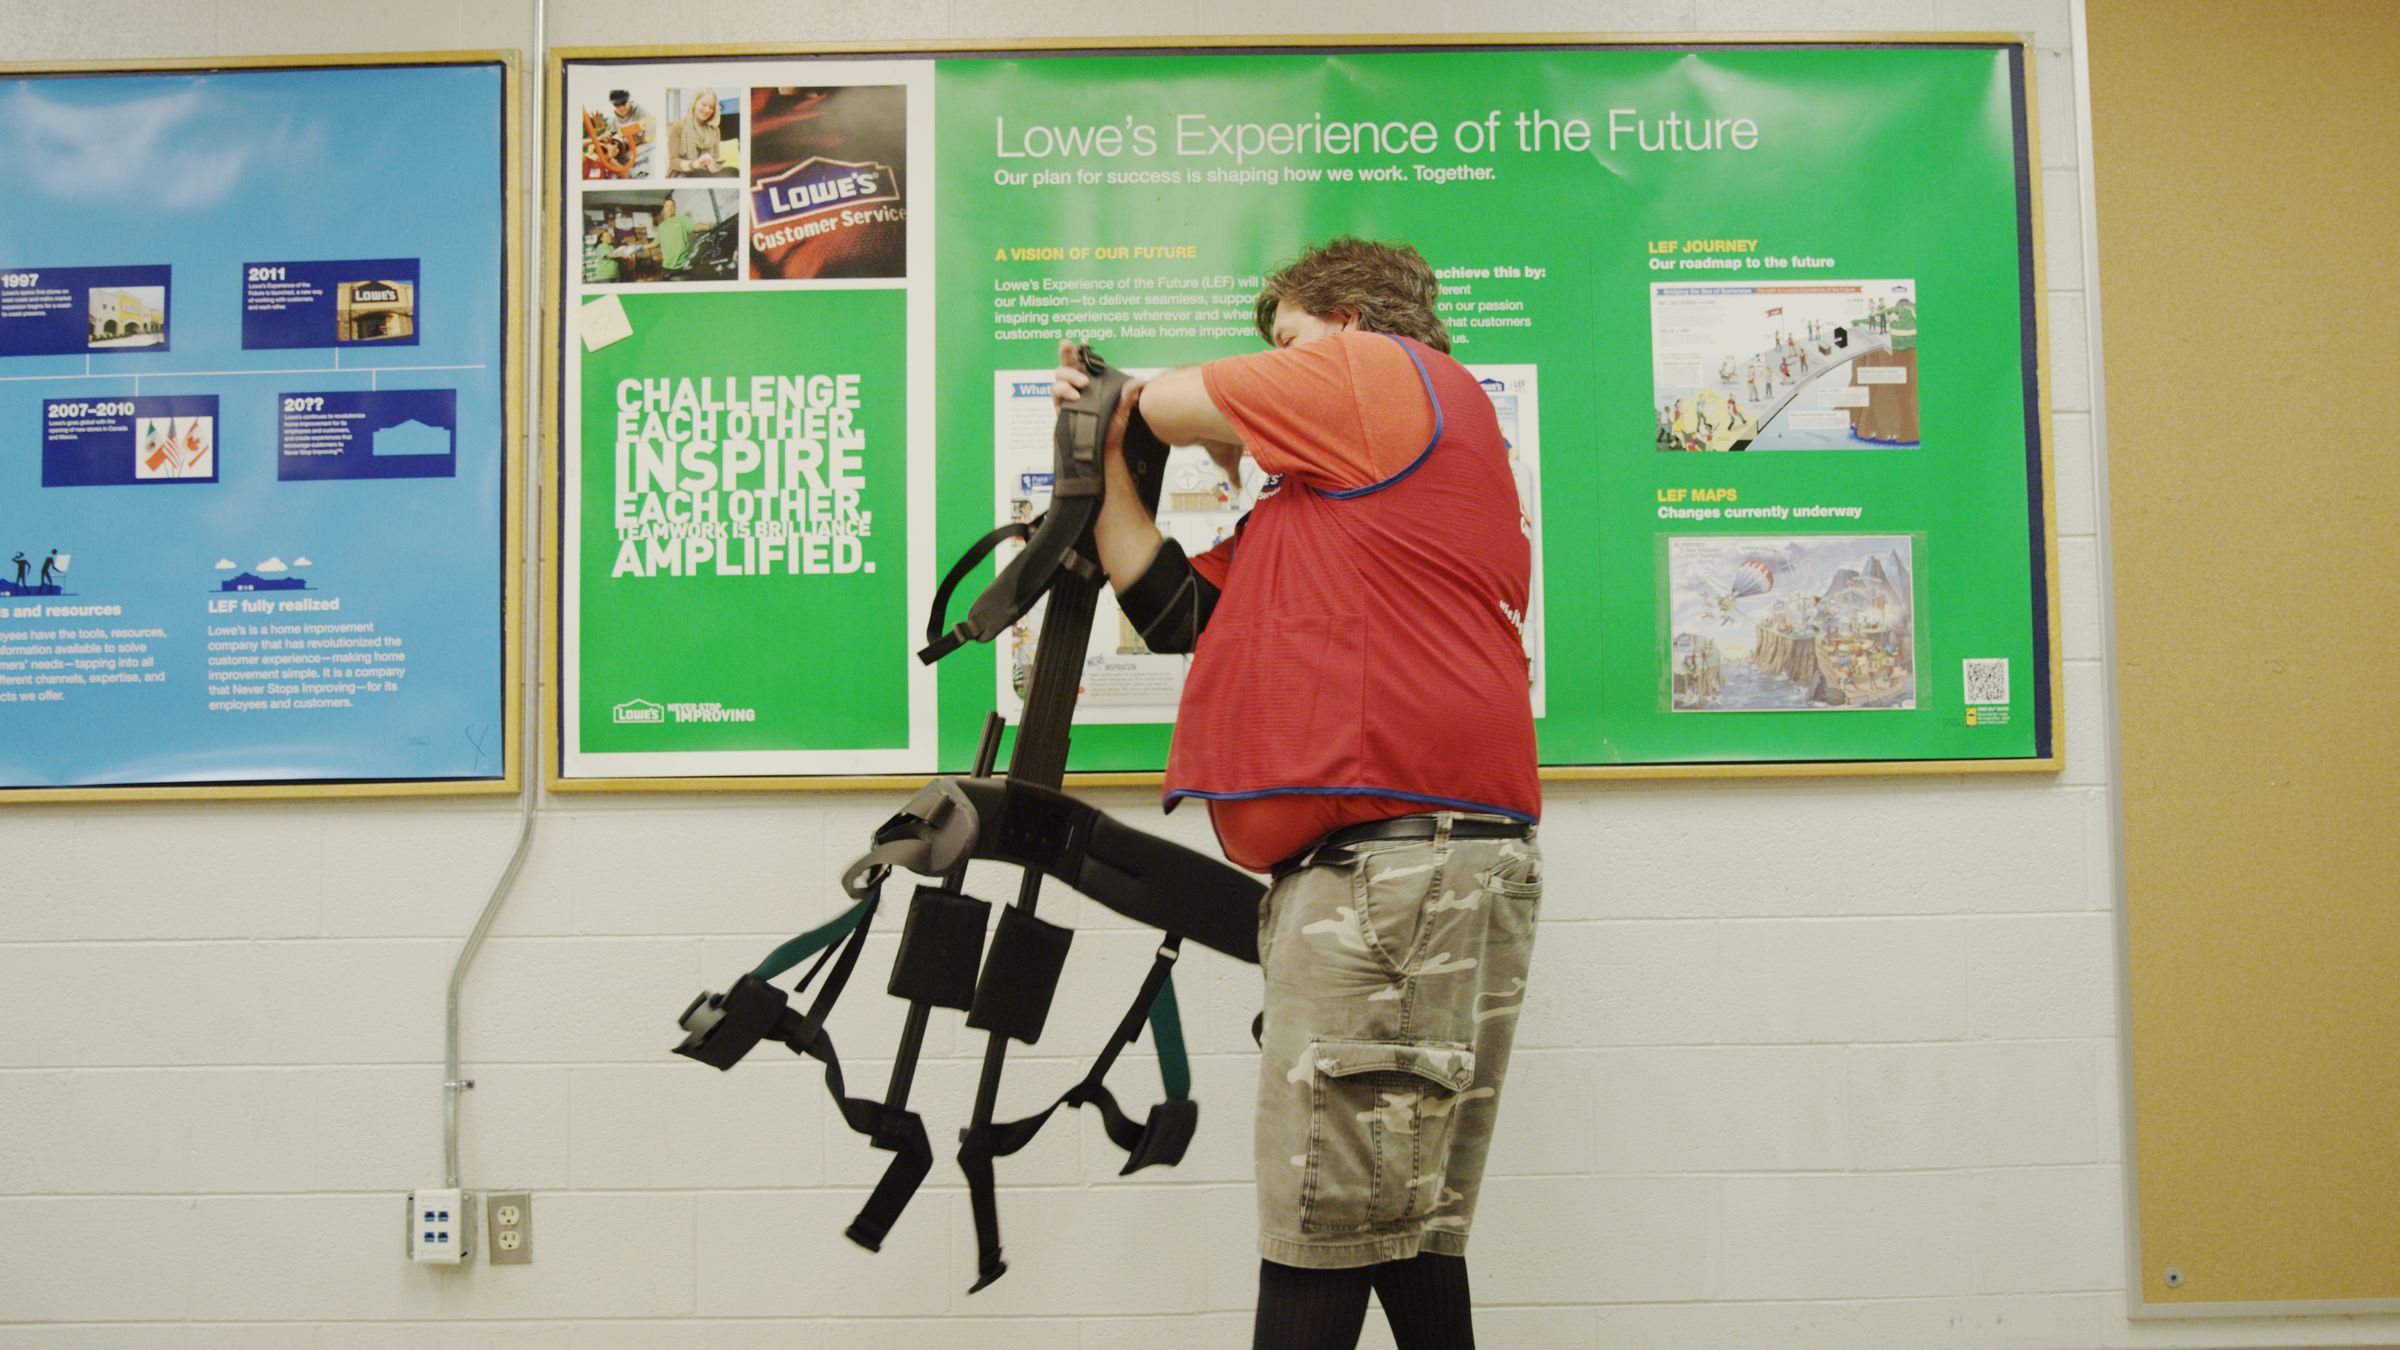 The exoskeleton is worn like a harness, and Lowe’s says it’s comfortable enough to have on all day.